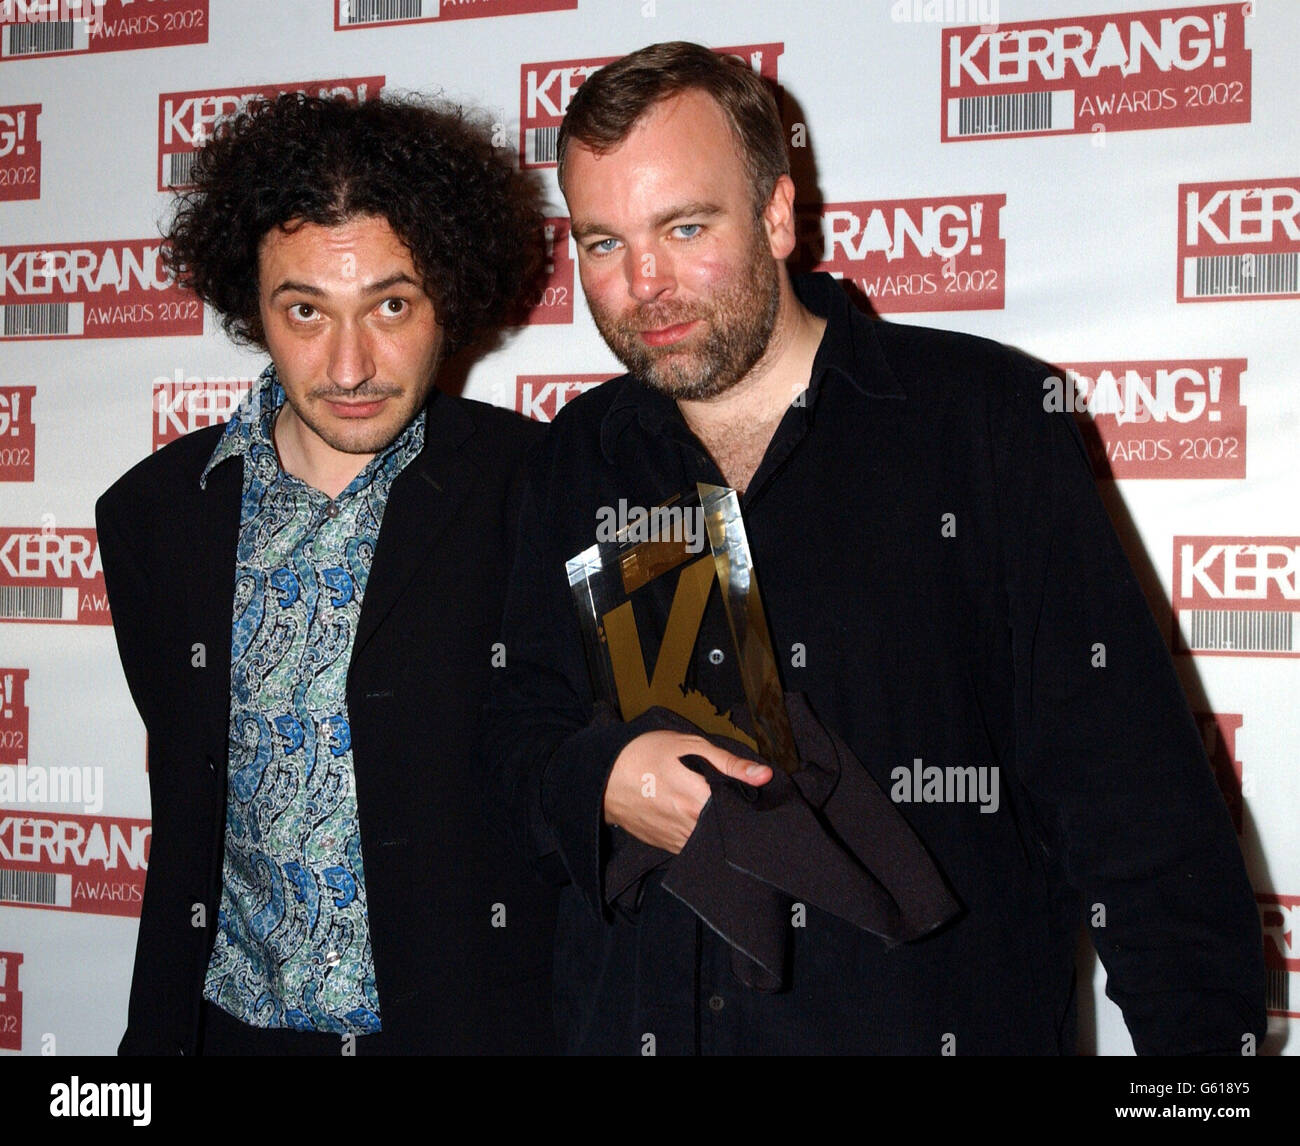 Jeremy Dyson (R) and Steve Pemberton from the League of Gentlemen arriving at the Hilton Park Lane Hotel in London for the Kerrang! Awards. Stock Photo